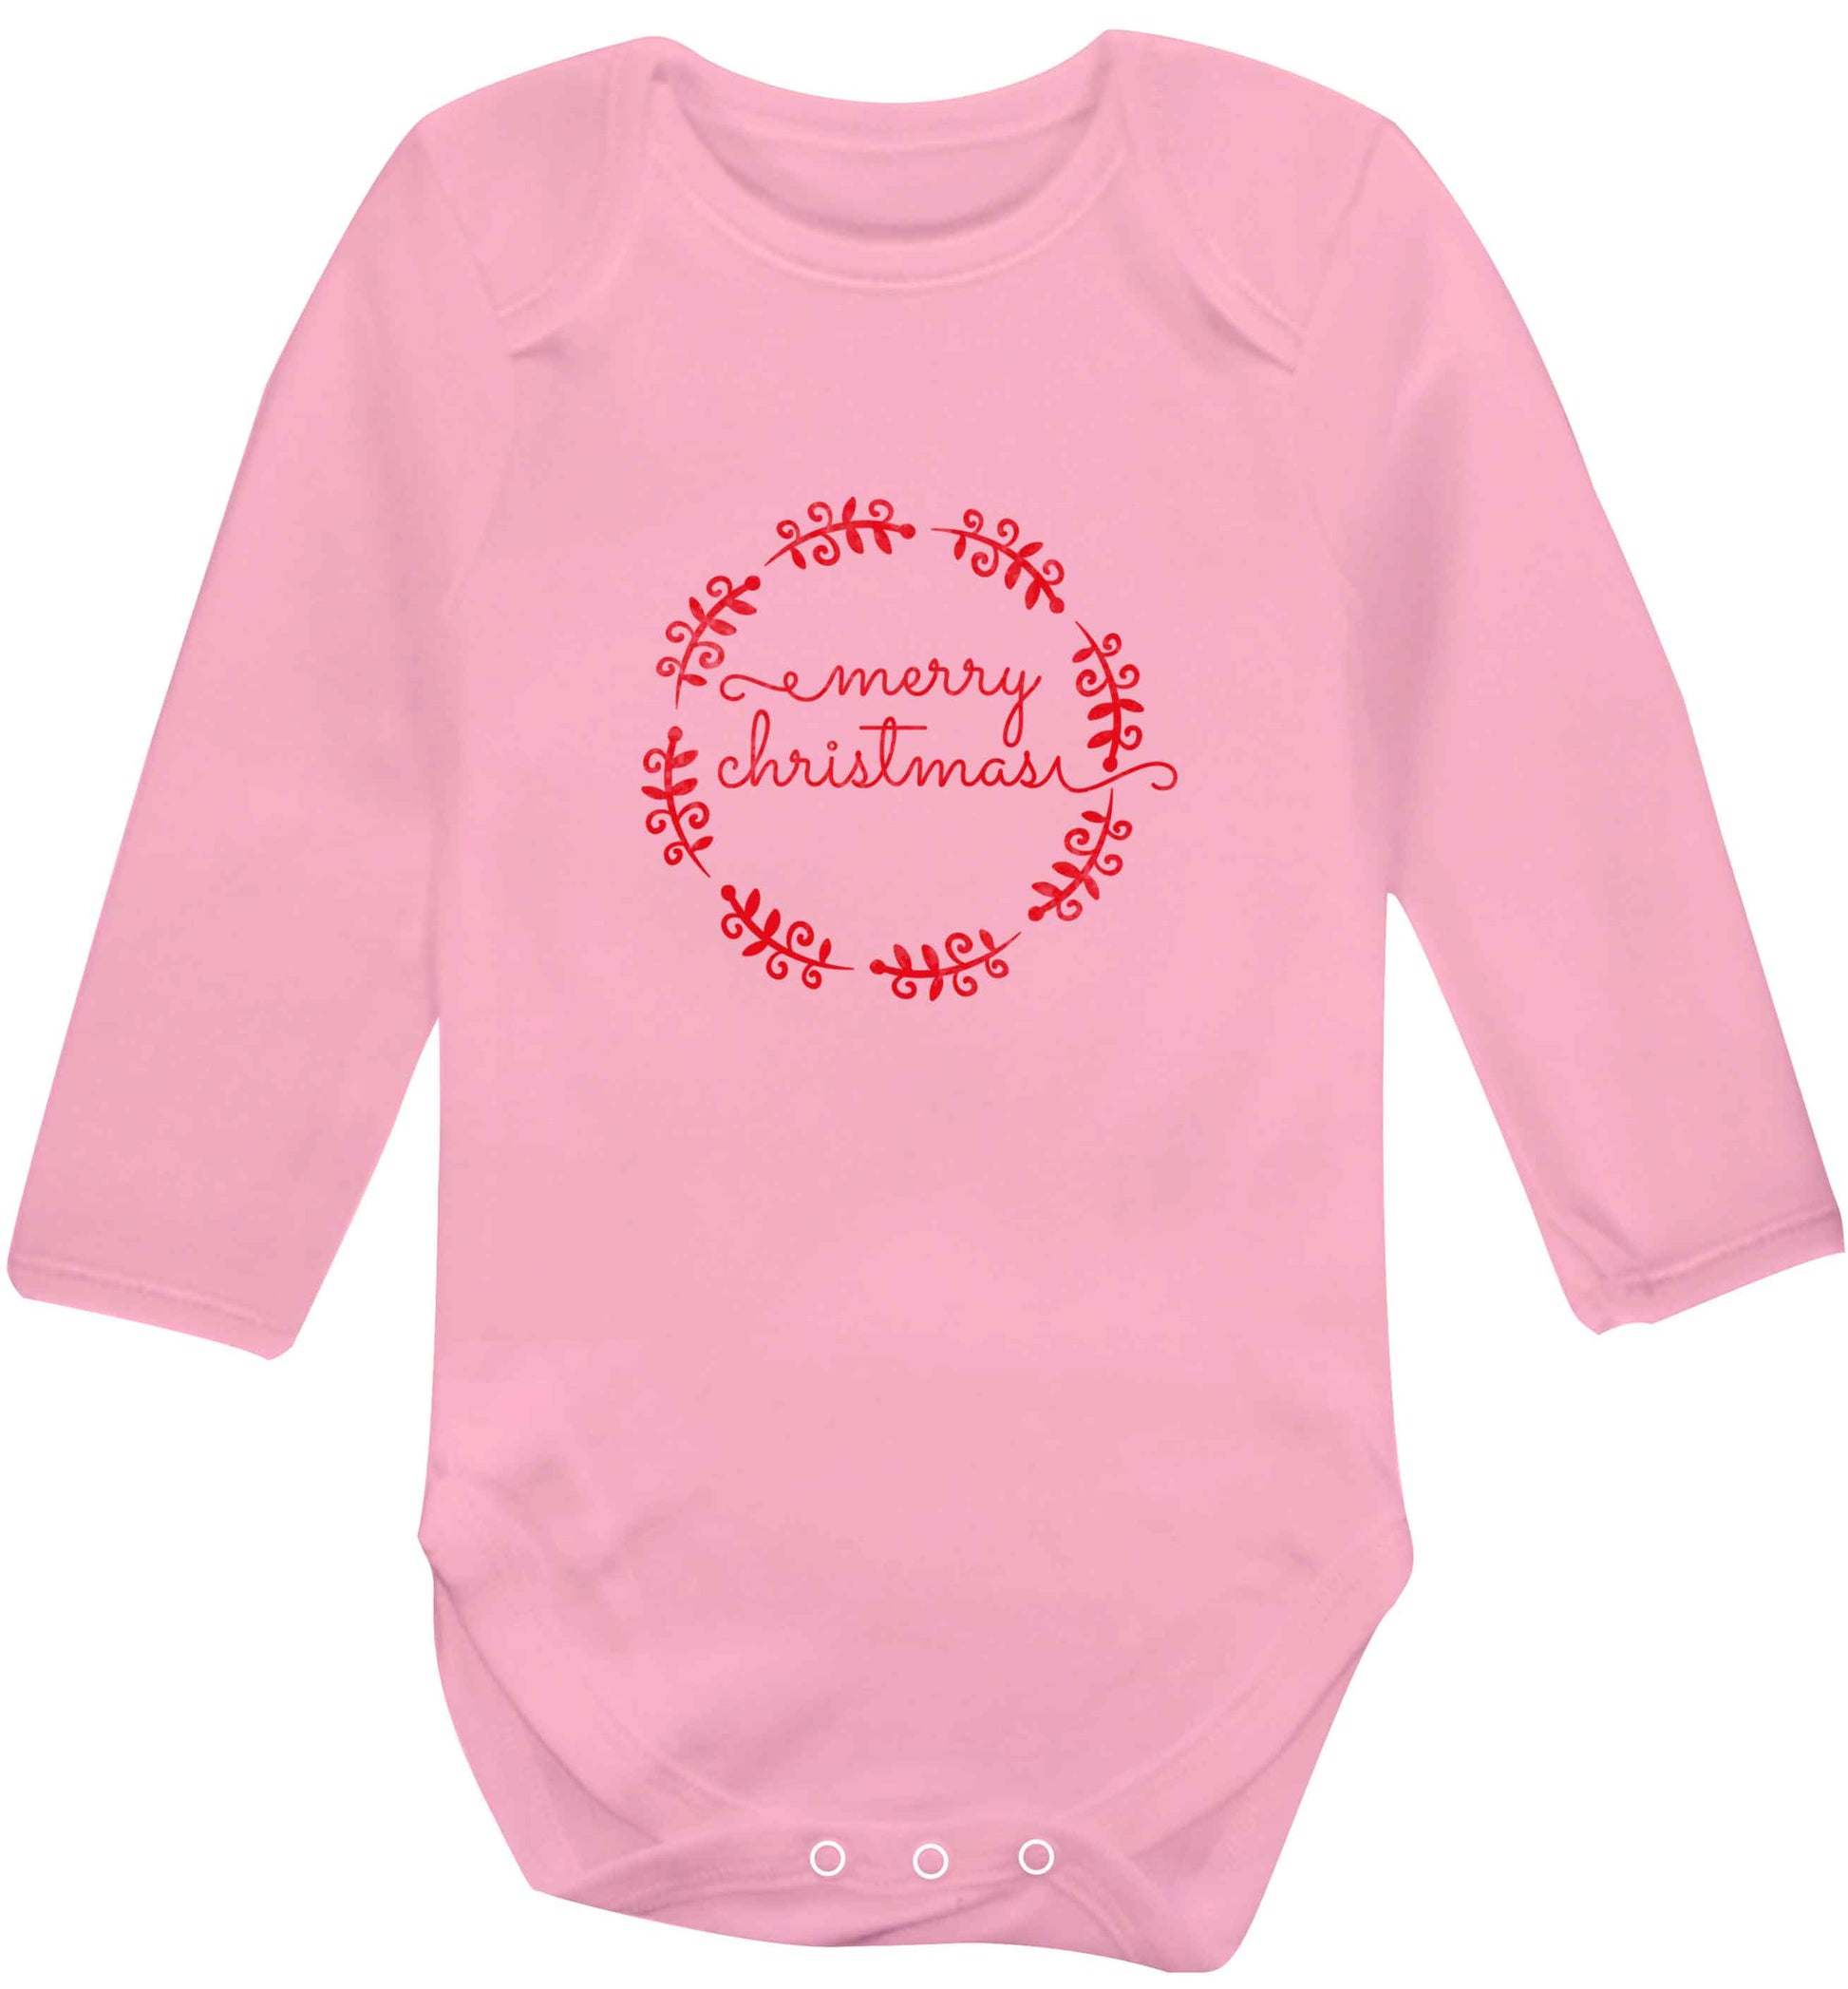 Merry christmas baby vest long sleeved pale pink 6-12 months